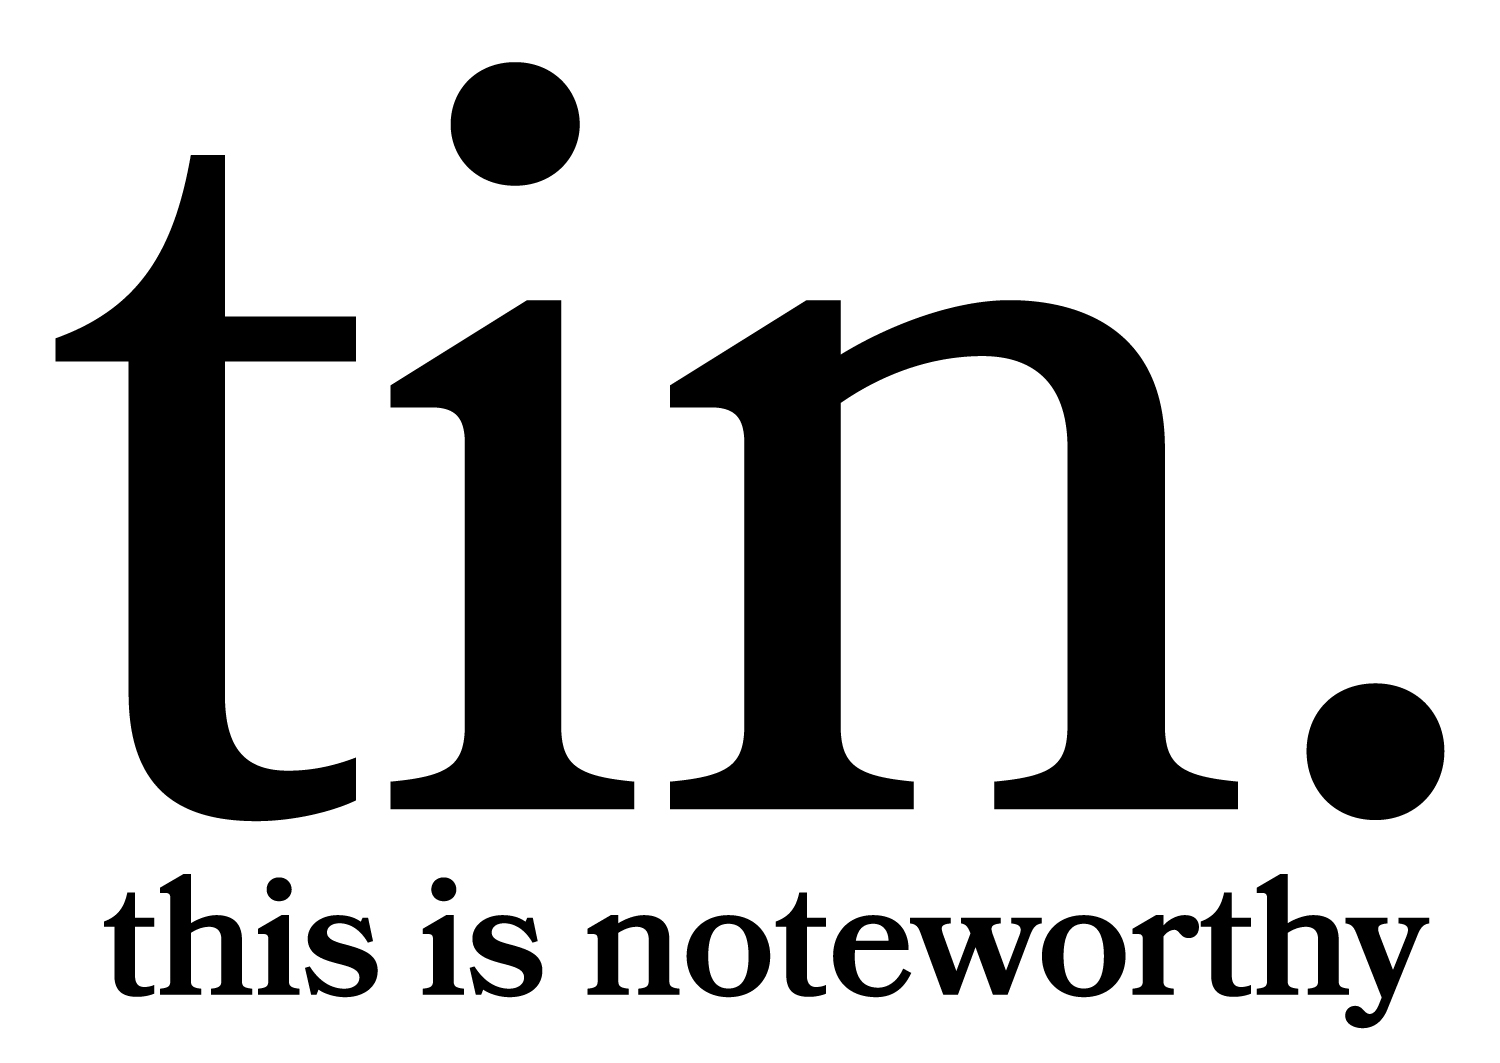 This Is Noteworthy logo